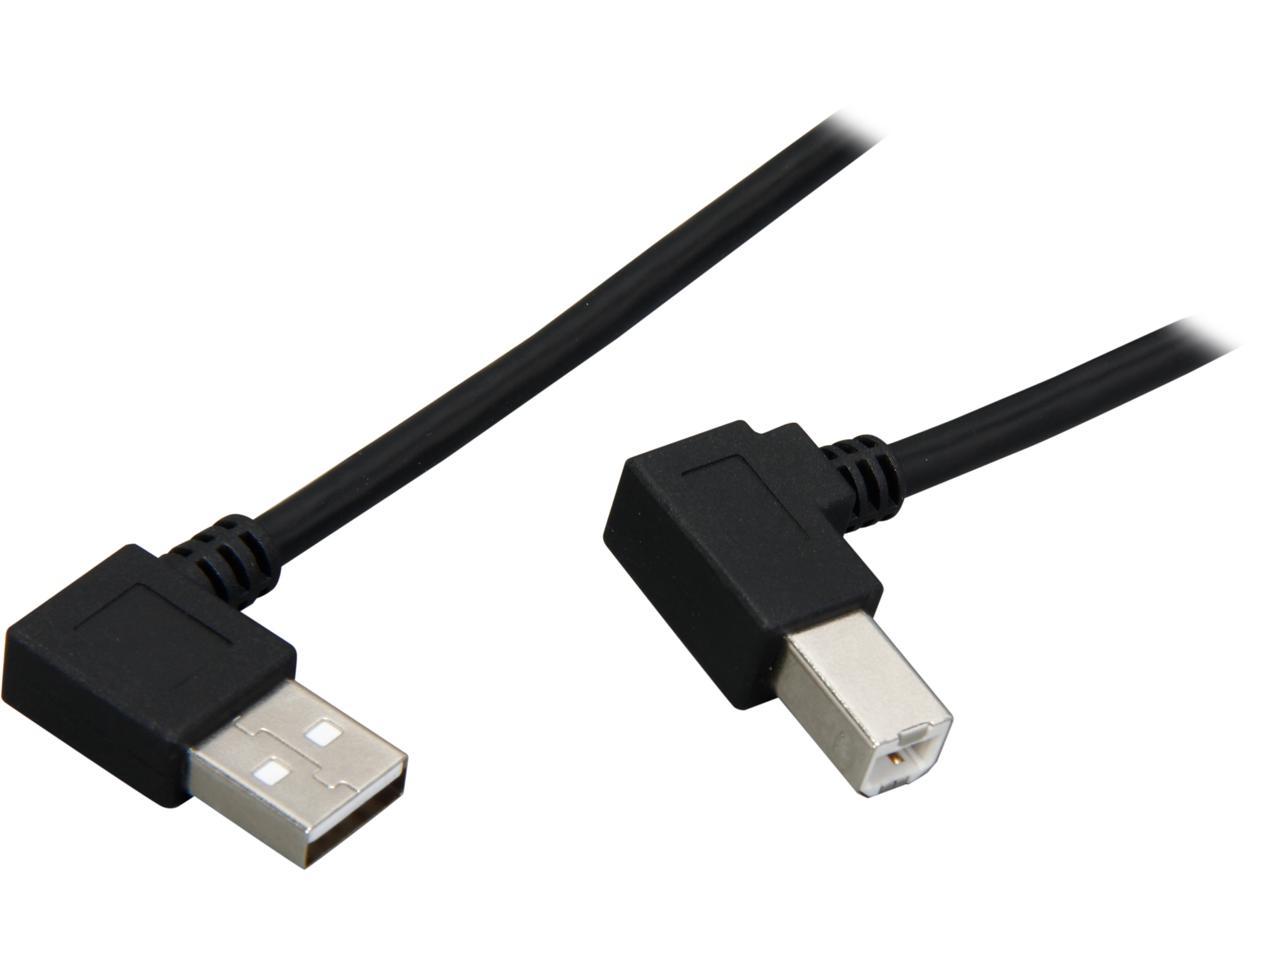 3.3 Feet, 1 Meters USB 2.0 Right Angle A Male to B Male Cable Black C2G 28109 USB Cable 